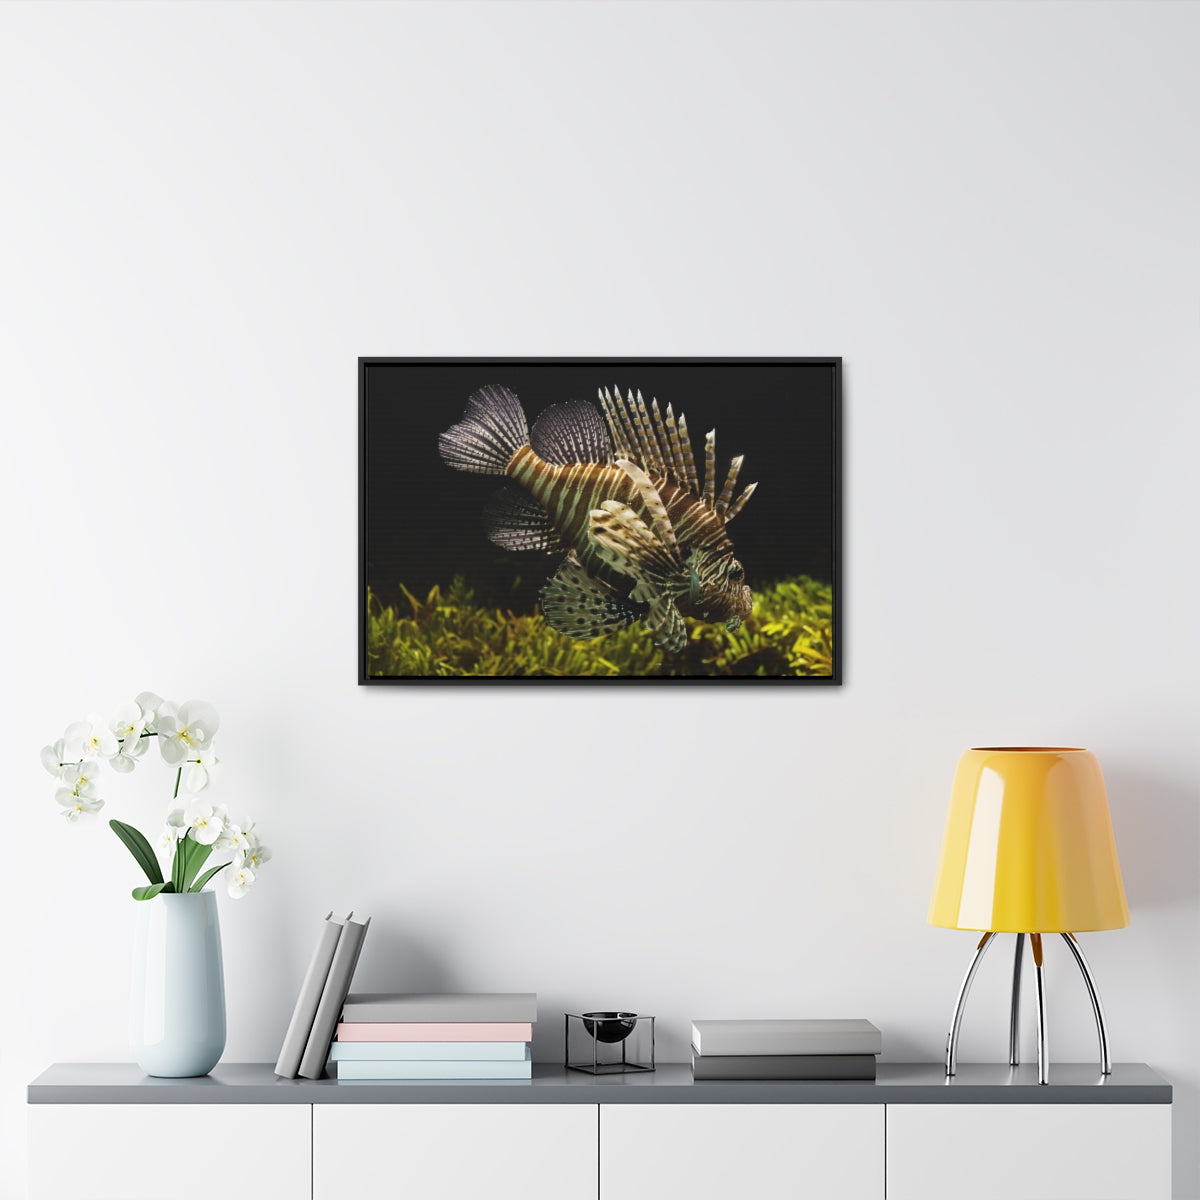 Lion Fish Over Seagrass Canvas Print